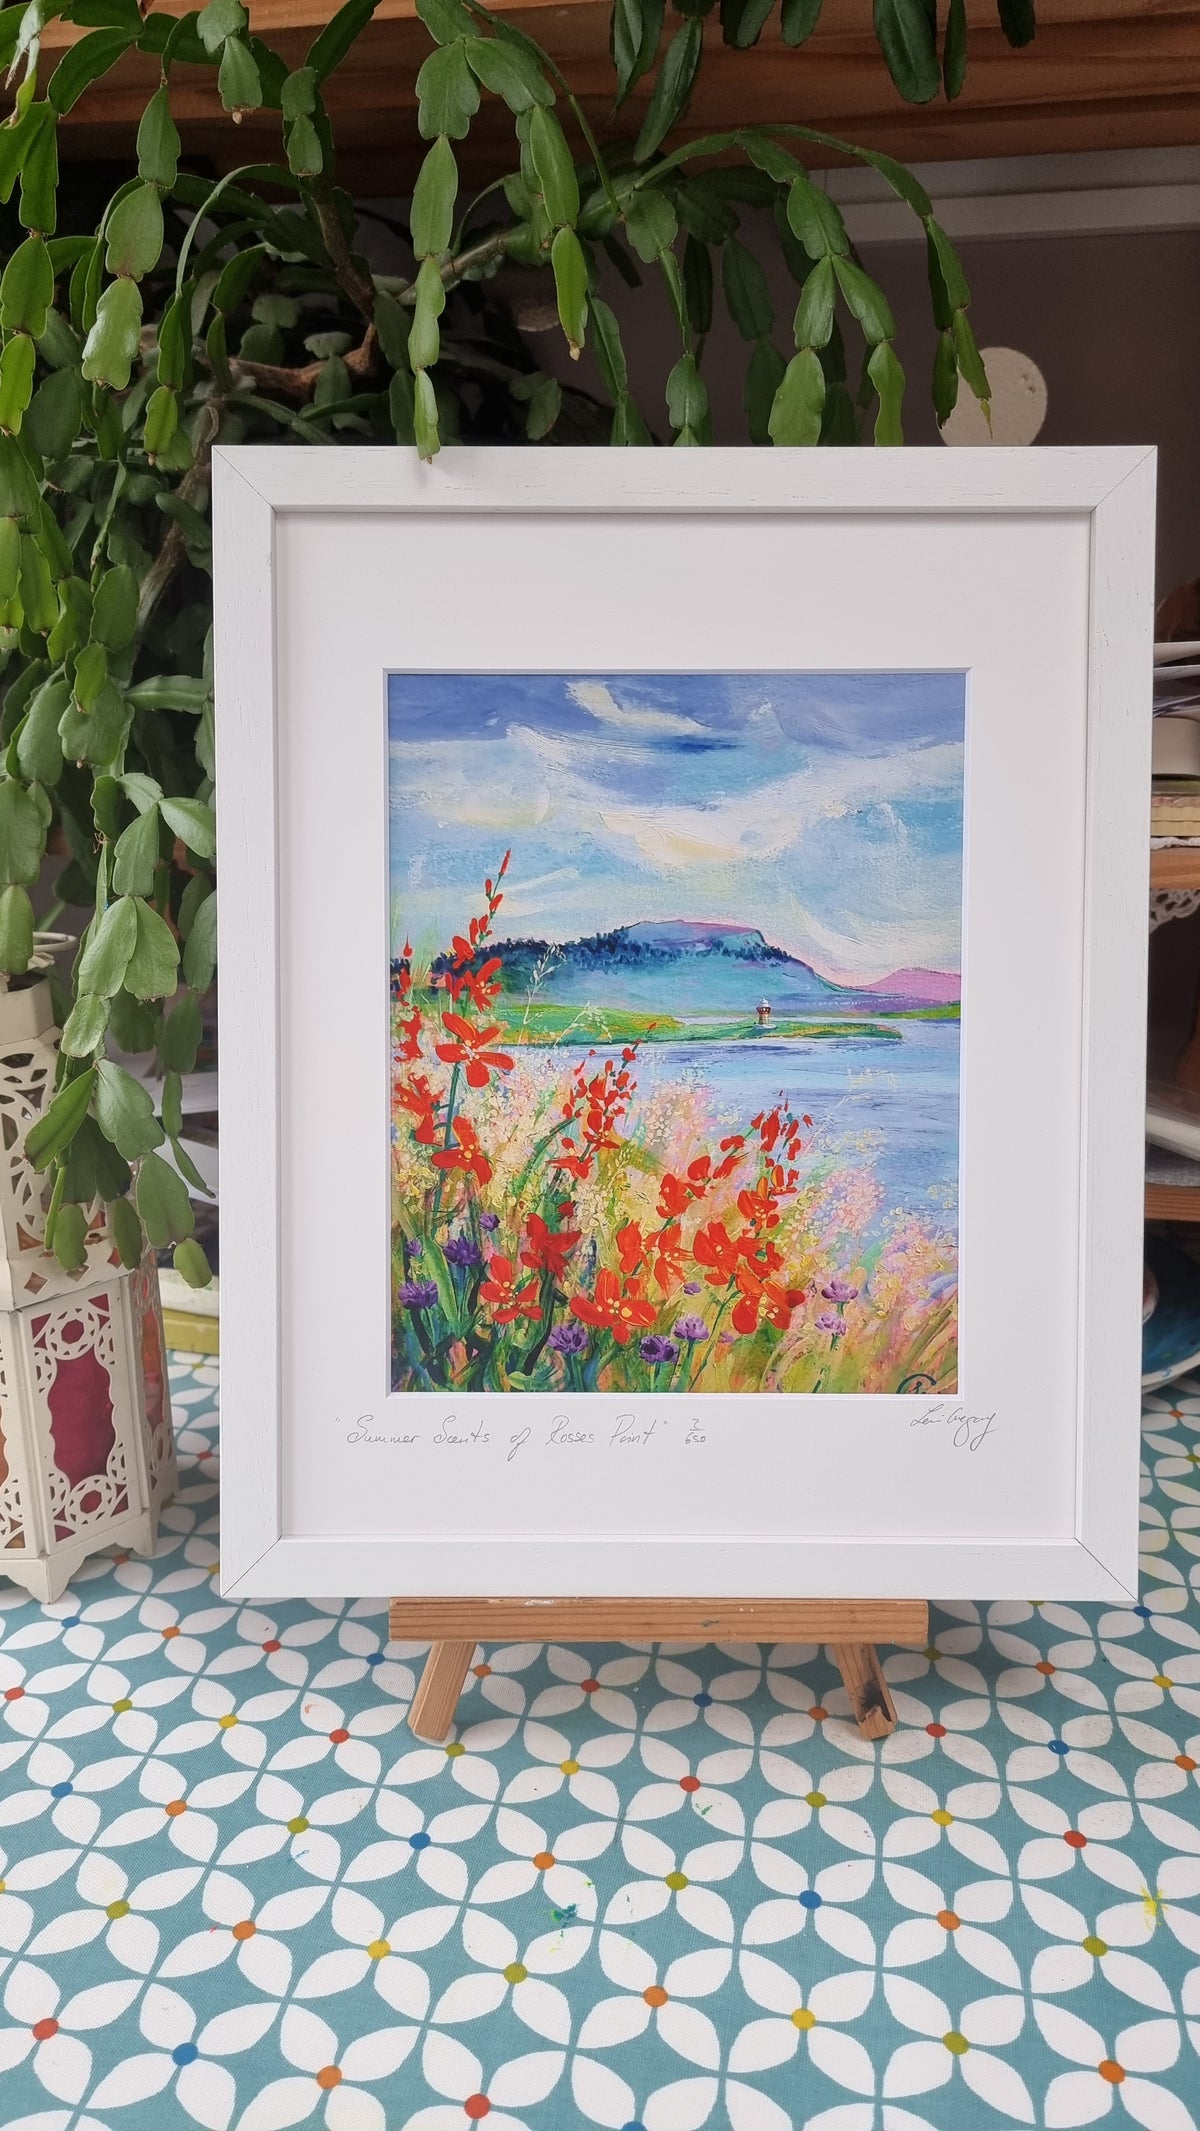 "Summer Scents of Rosses Point"